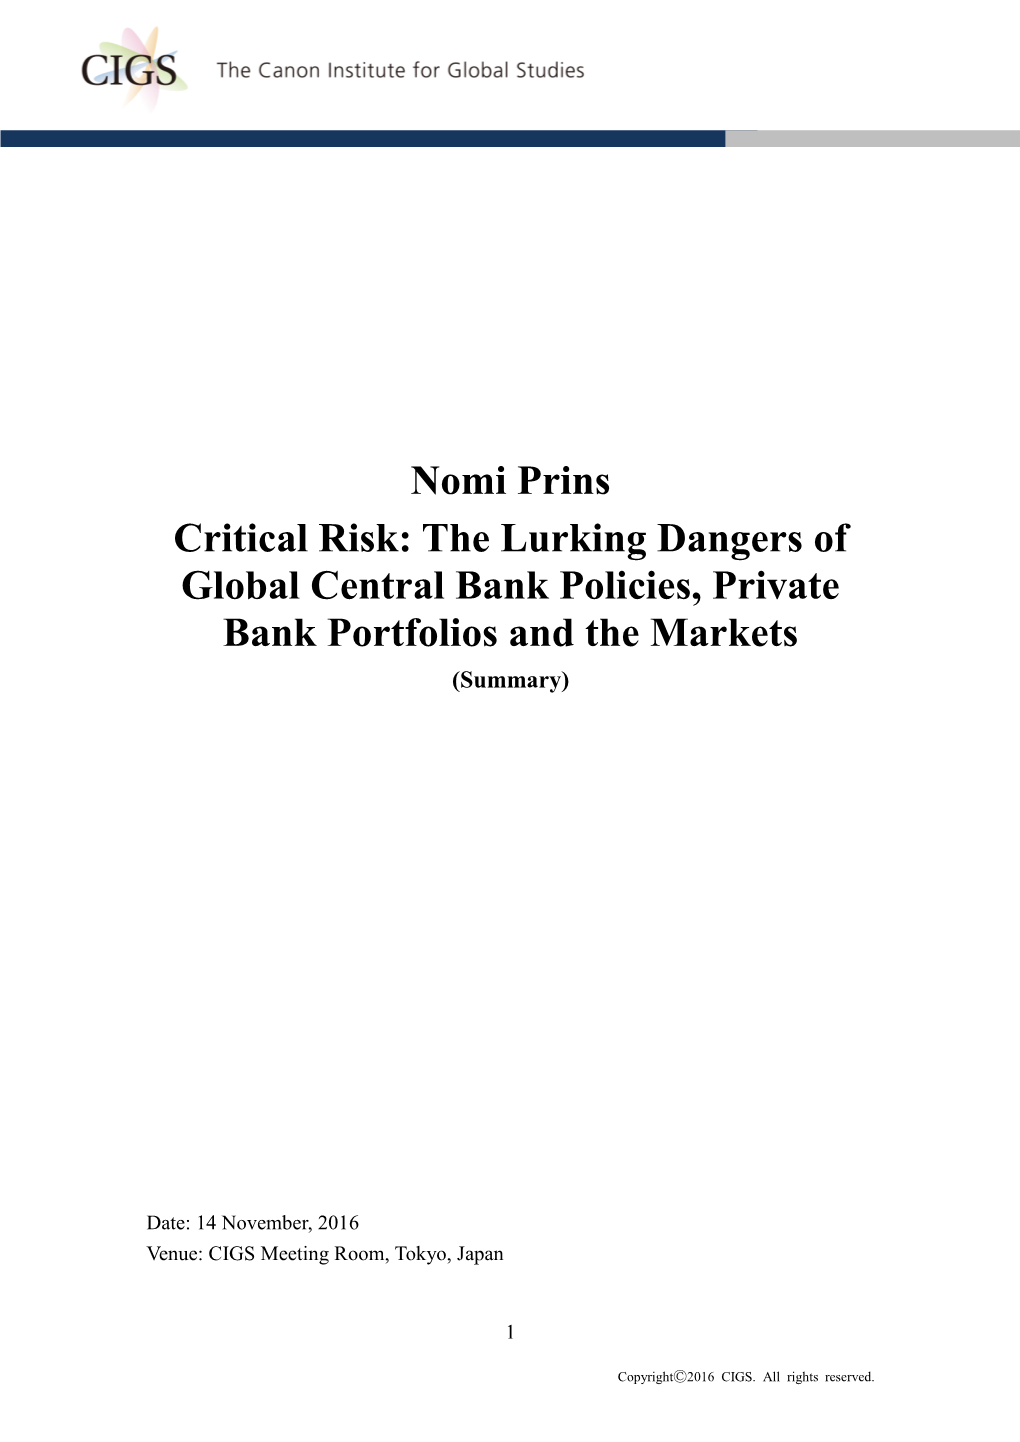 Nomi Prins Critical Risk: the Lurking Dangers of Global Central Bank Policies, Private Bank Portfolios and the Markets (Summary)